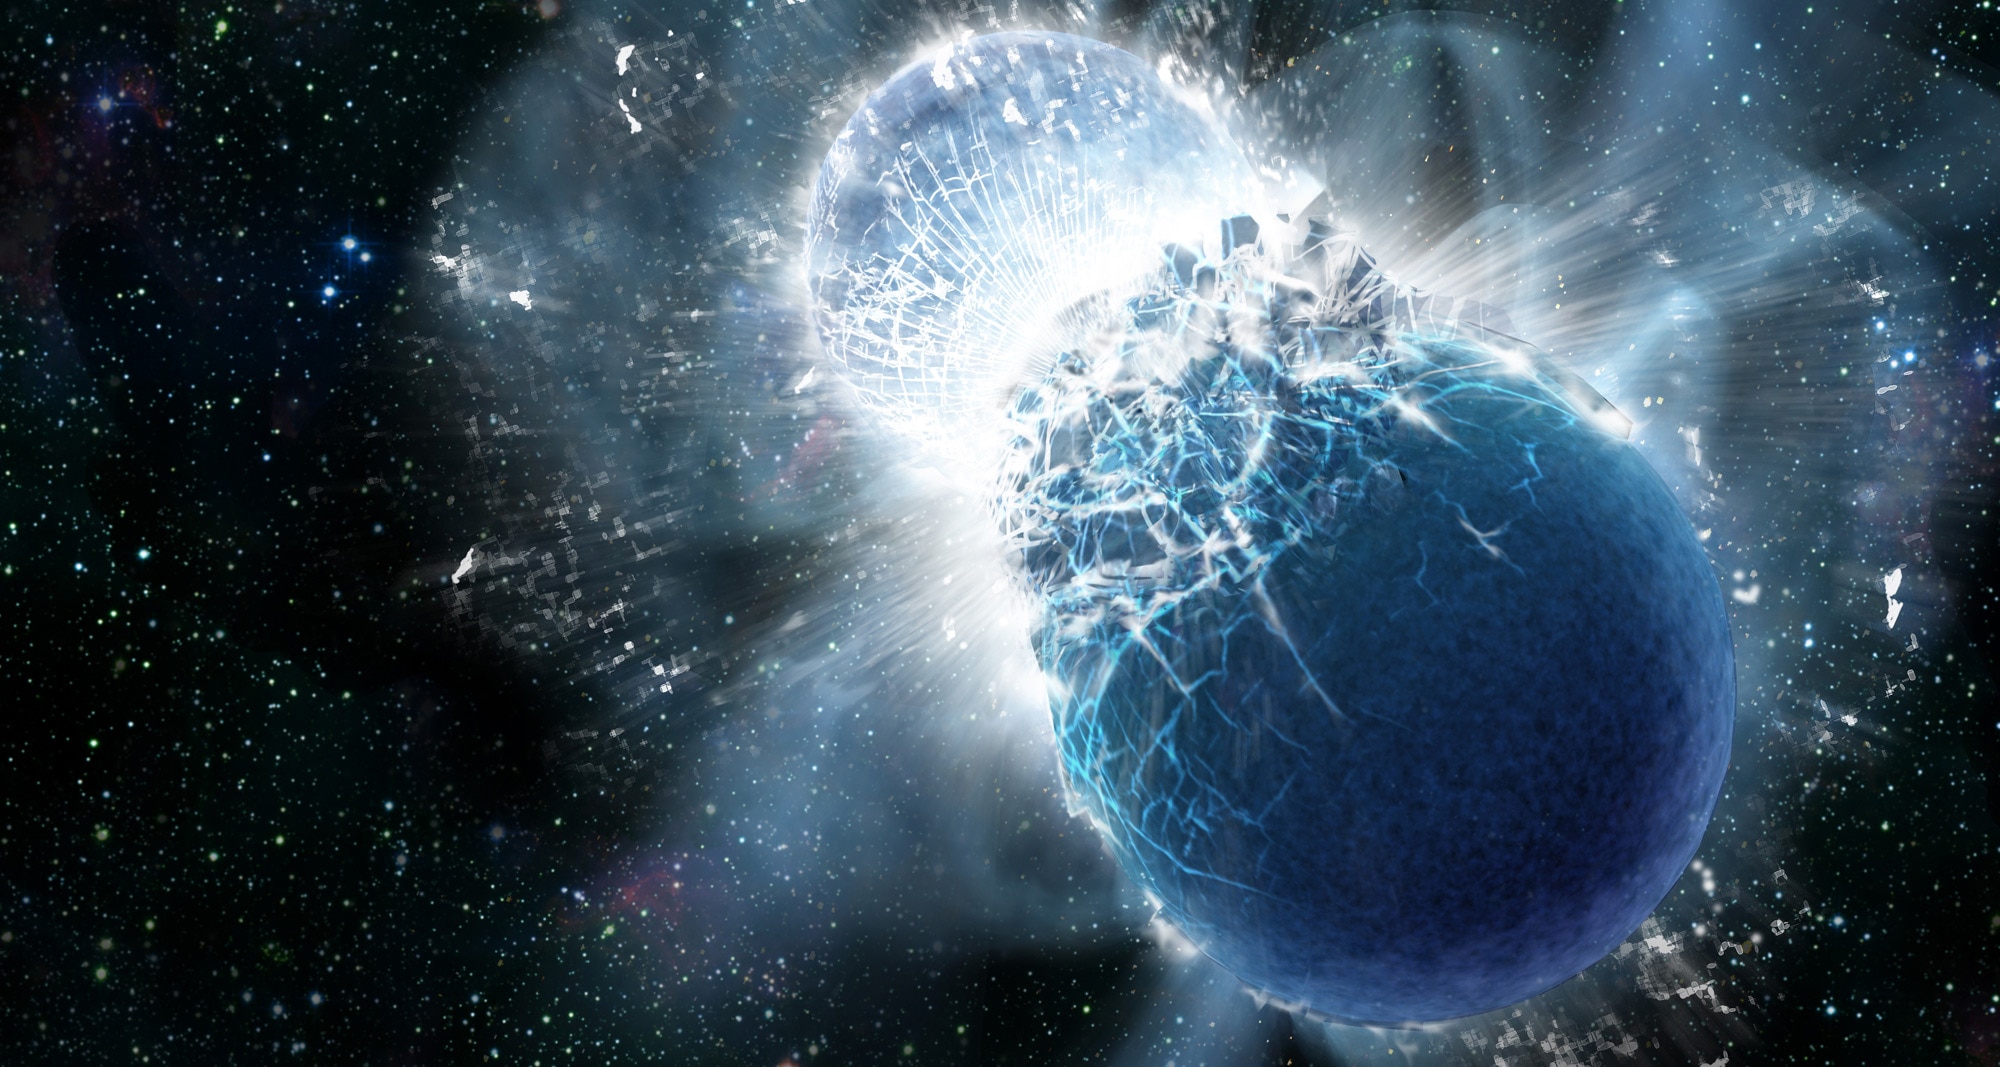 Artwork depicting the moment of collision between two neutron stars. The resulting explosion is… quite large. Credit: Dana Berry, SkyWorks Digital, Inc.